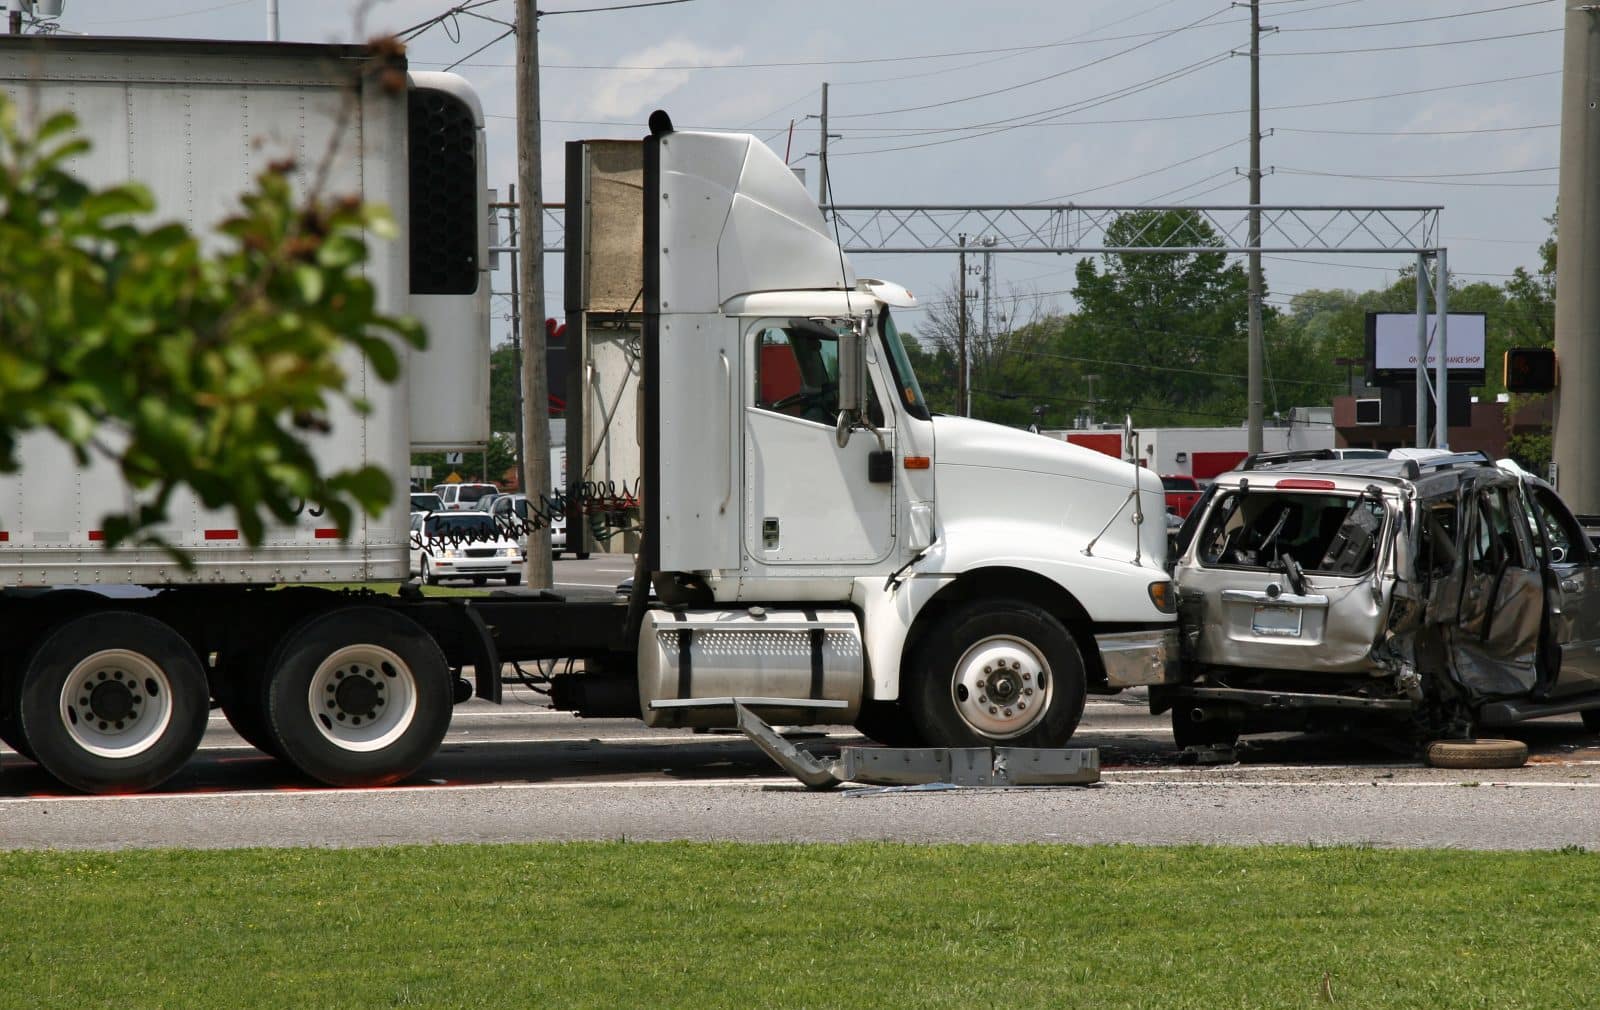 A truck accident at an intersection.